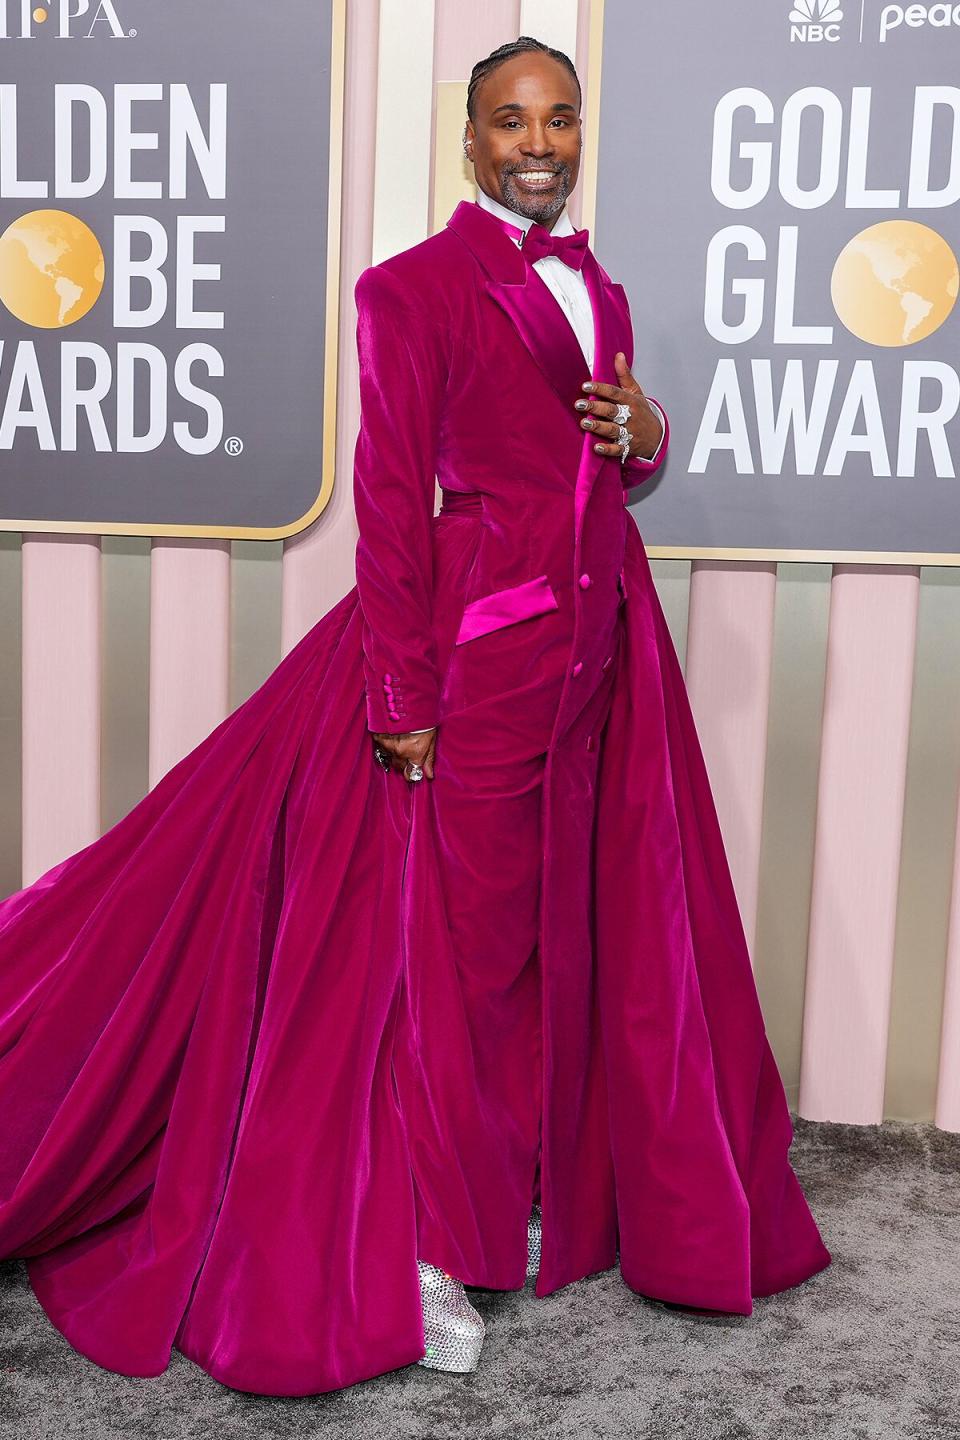 Billy Porter Honors His GameChanging Tuxedo Gown at the 2023 Golden